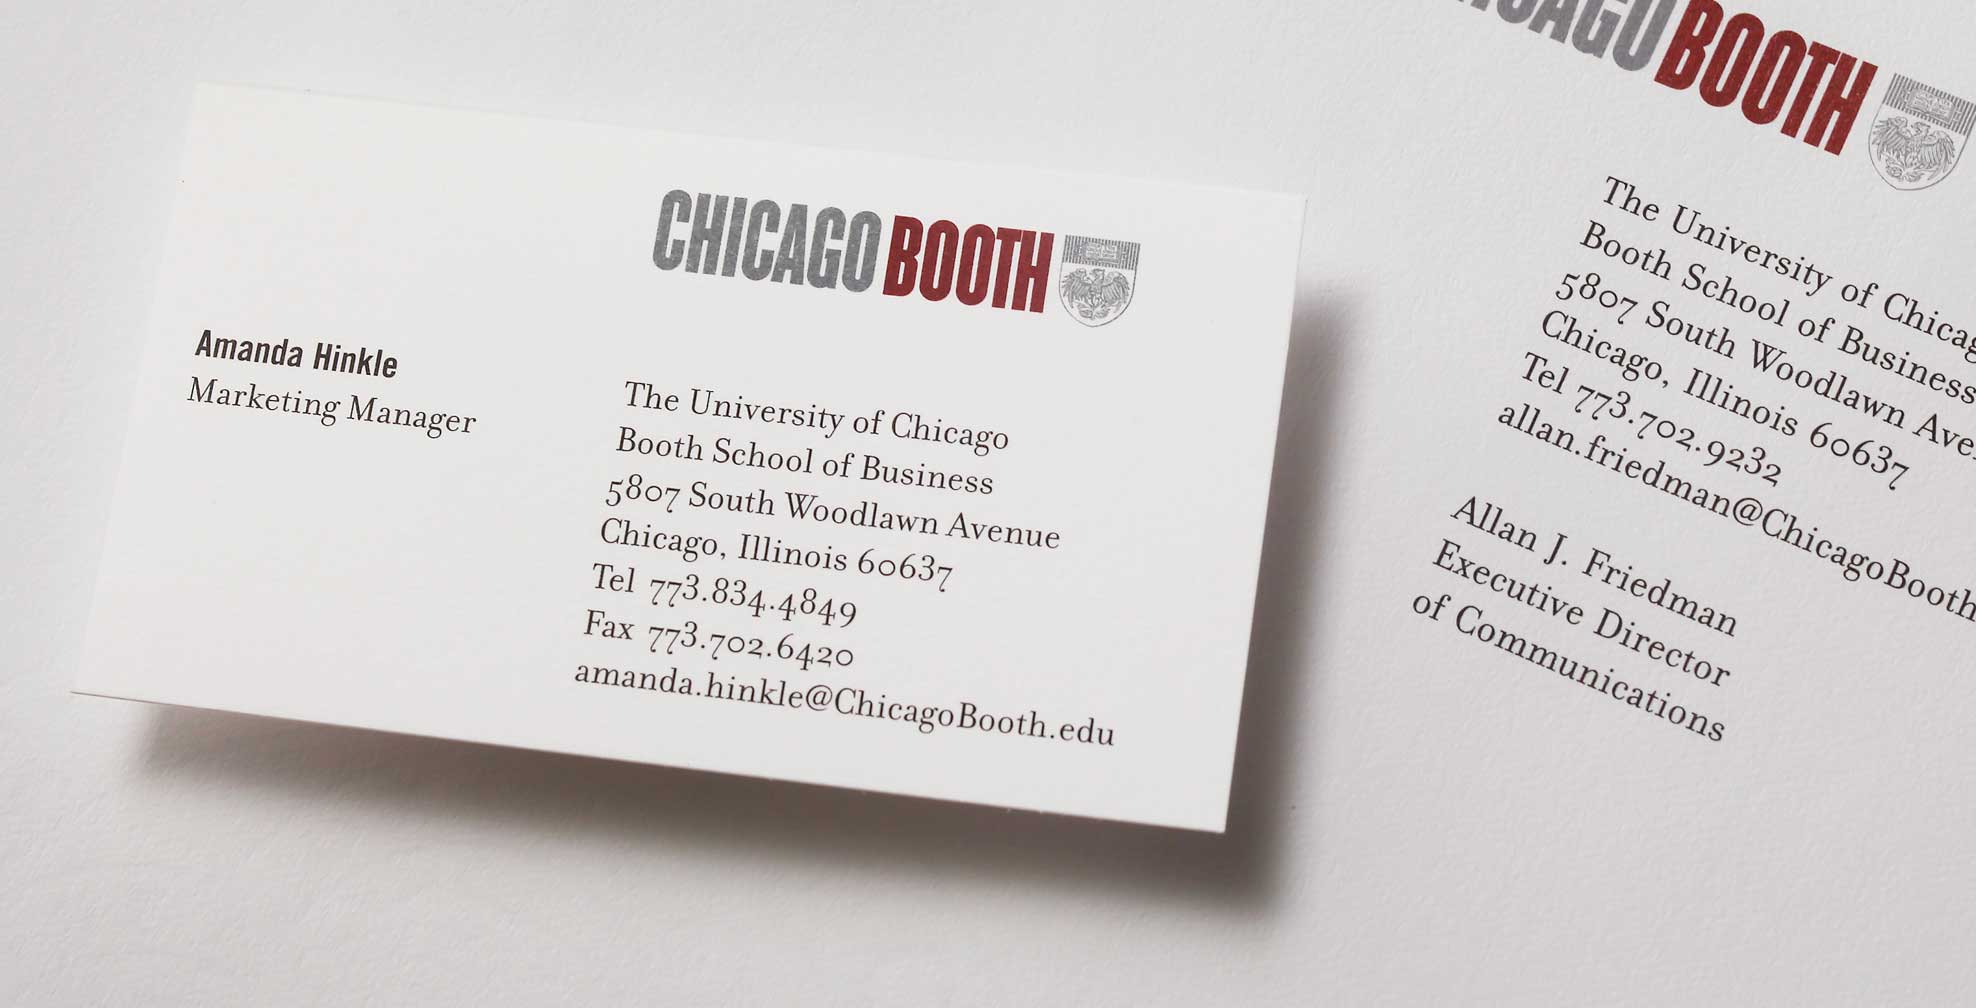 University of Chicago Booth School of Business - Crosby Associates - Chicago